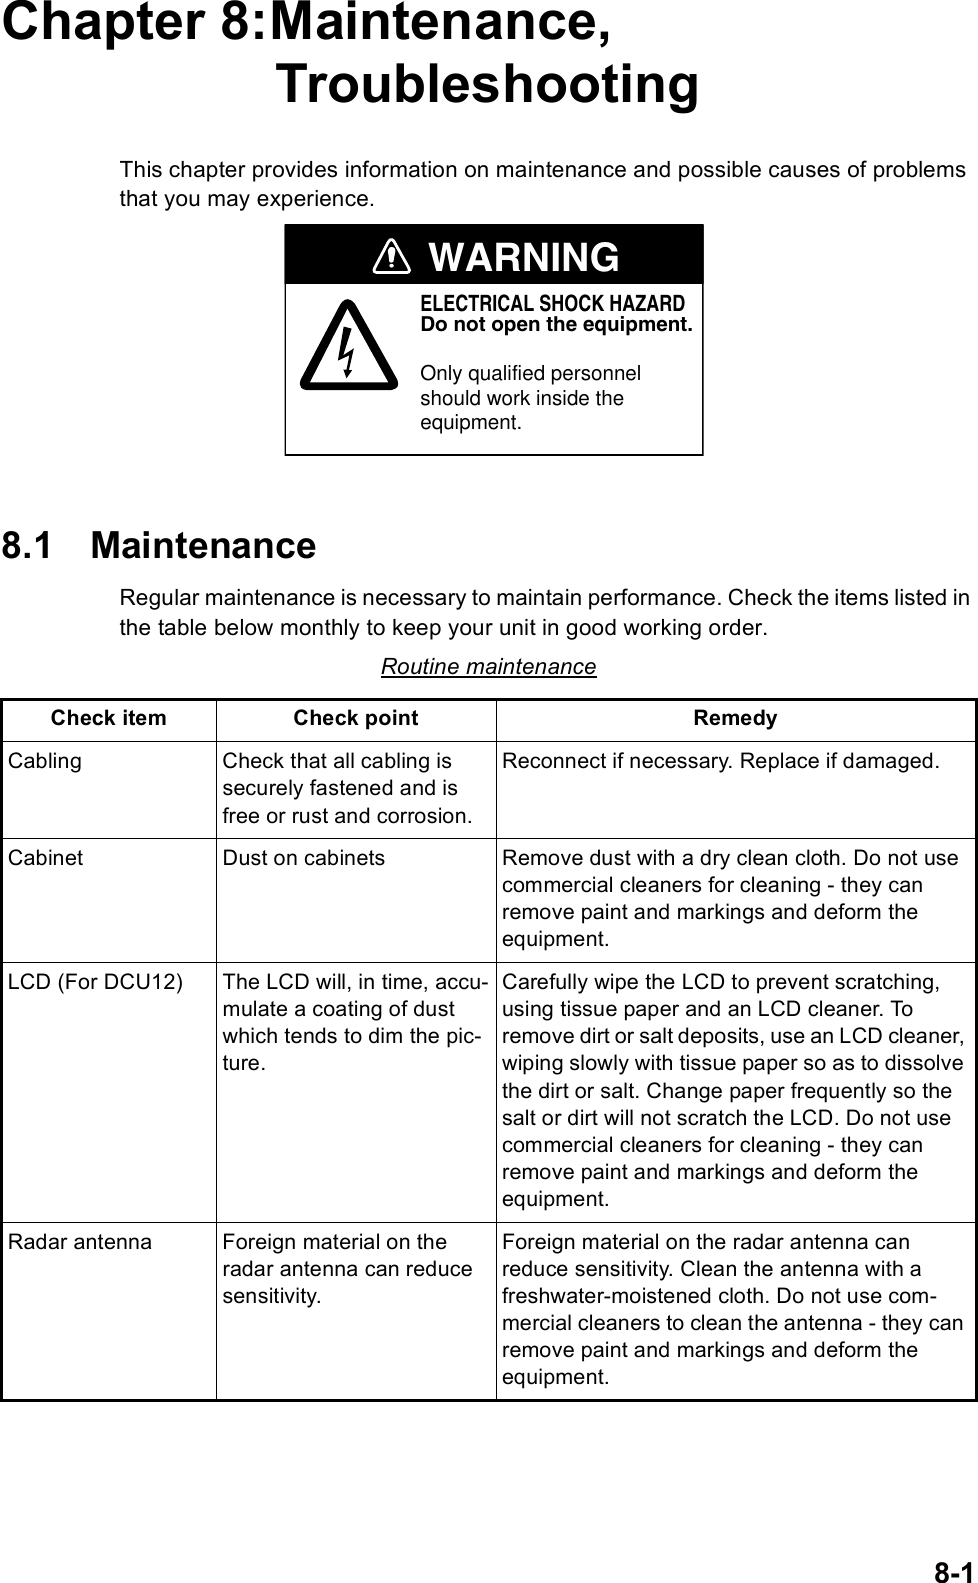 8-1Chapter 8:Maintenance, TroubleshootingThis chapter provides information on maintenance and possible causes of problems that you may experience.8.1 MaintenanceRegular maintenance is necessary to maintain performance. Check the items listed in the table below monthly to keep your unit in good working order.Routine maintenanceCheck item Check point RemedyCabling Check that all cabling is securely fastened and is free or rust and corrosion.Reconnect if necessary. Replace if damaged.Cabinet Dust on cabinets Remove dust with a dry clean cloth. Do not use commercial cleaners for cleaning - they can remove paint and markings and deform the equipment.LCD (For DCU12) The LCD will, in time, accu-mulate a coating of dust which tends to dim the pic-ture. Carefully wipe the LCD to prevent scratching, using tissue paper and an LCD cleaner. To remove dirt or salt deposits, use an LCD cleaner, wiping slowly with tissue paper so as to dissolve the dirt or salt. Change paper frequently so the salt or dirt will not scratch the LCD. Do not use commercial cleaners for cleaning - they can remove paint and markings and deform the equipment.Radar antenna Foreign material on the radar antenna can reduce sensitivity.Foreign material on the radar antenna can reduce sensitivity. Clean the antenna with a freshwater-moistened cloth. Do not use com-mercial cleaners to clean the antenna - they can remove paint and markings and deform the equipment. WARNINGELECTRICAL SHOCK HAZARDDo not open the equipment.Only qualified personnelshould work inside theequipment.